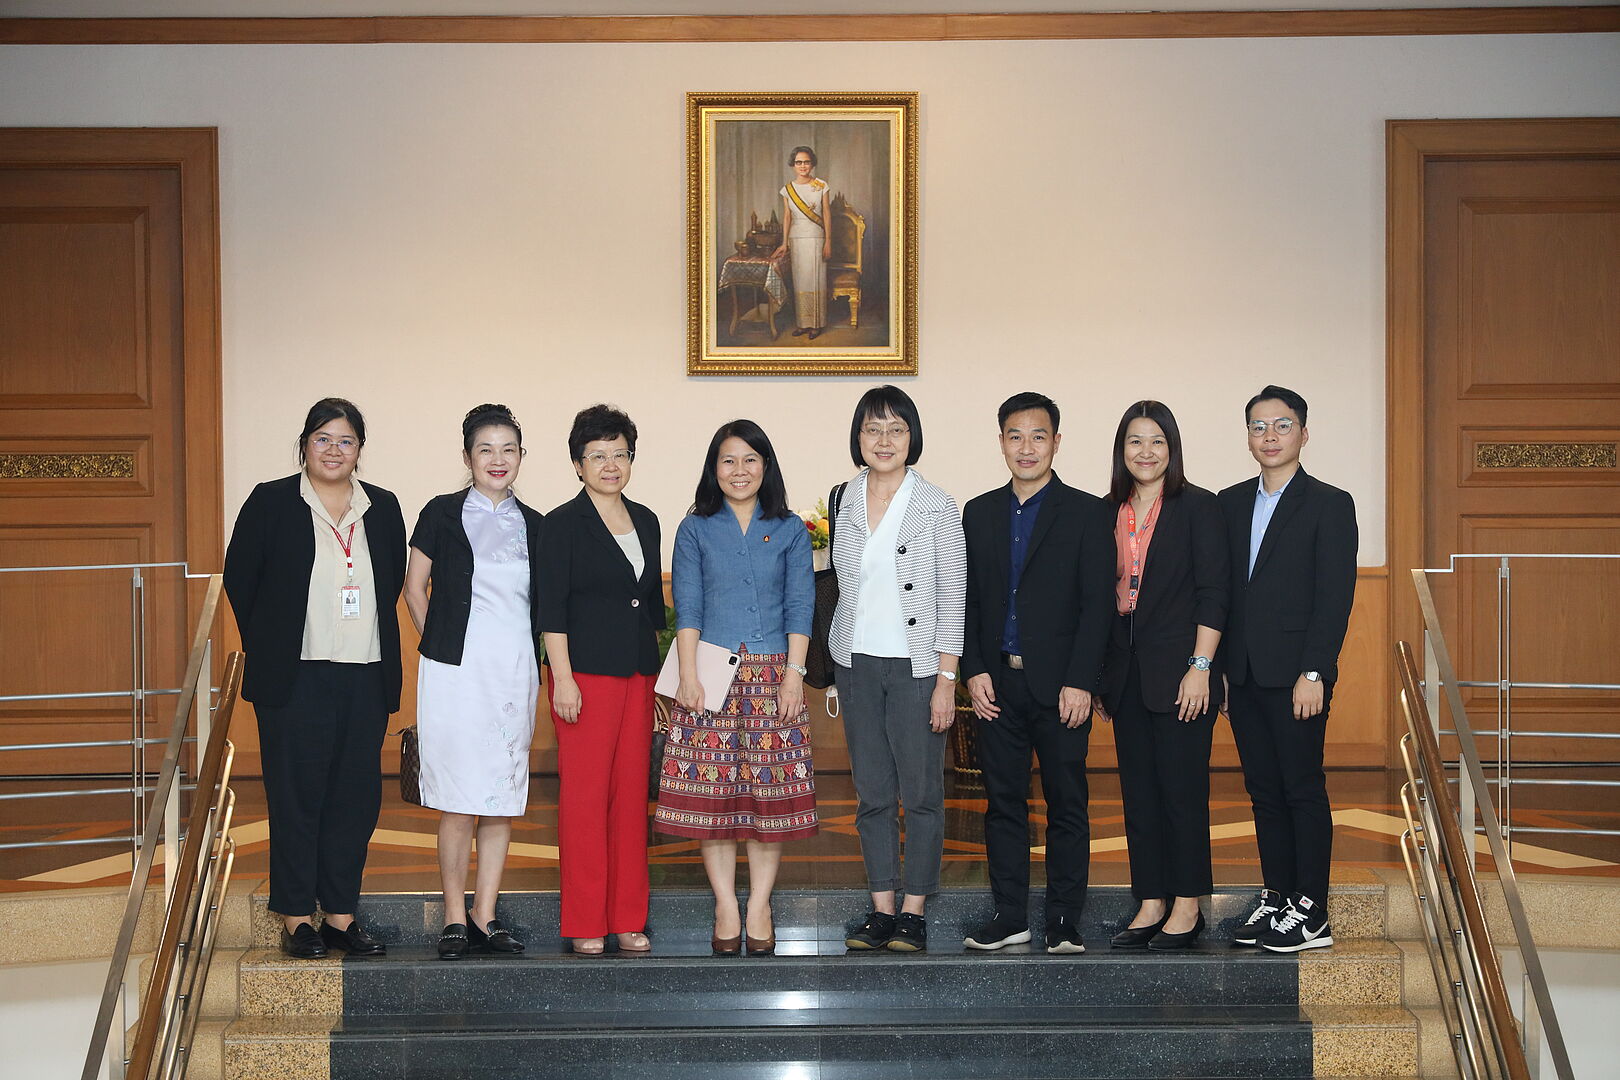 A Visit from the Counsellor of Education, the Chinese Embassy in Bangkok